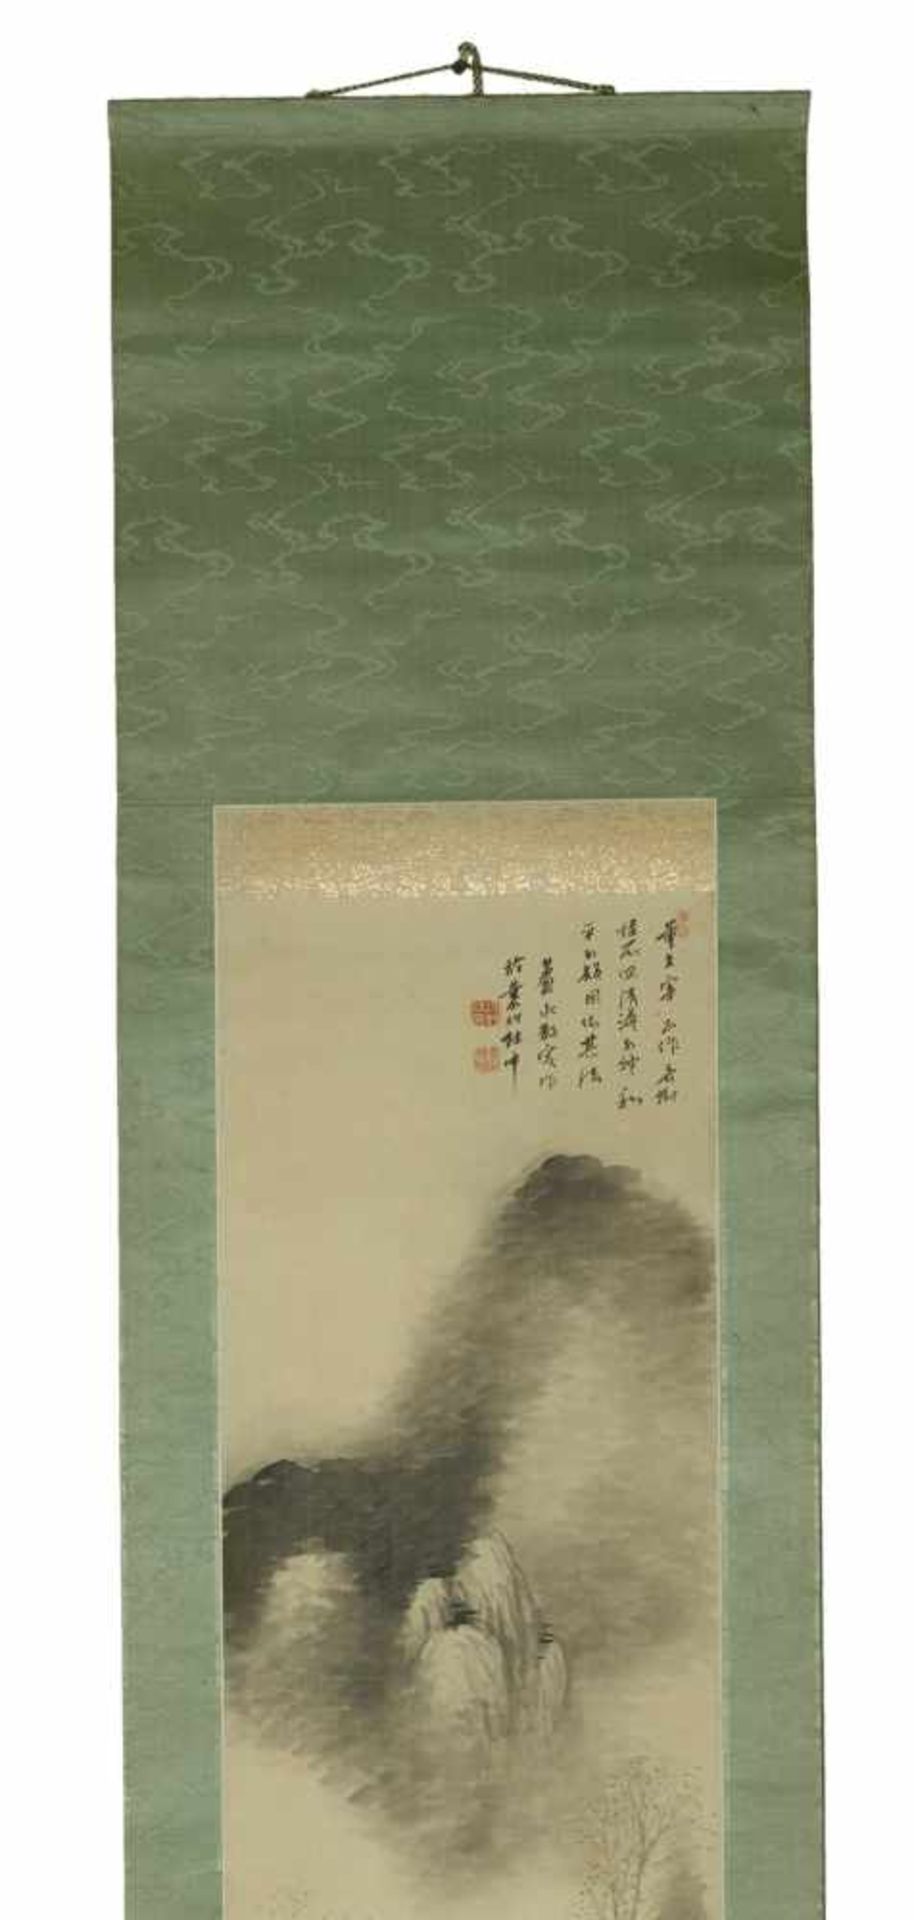 ROCKY LANDSCAPE, DREAMY HOUSE WITH MAN Painting with ink. Japan, 19th cent. to Meiji (1868 - 1912) A - Image 2 of 3